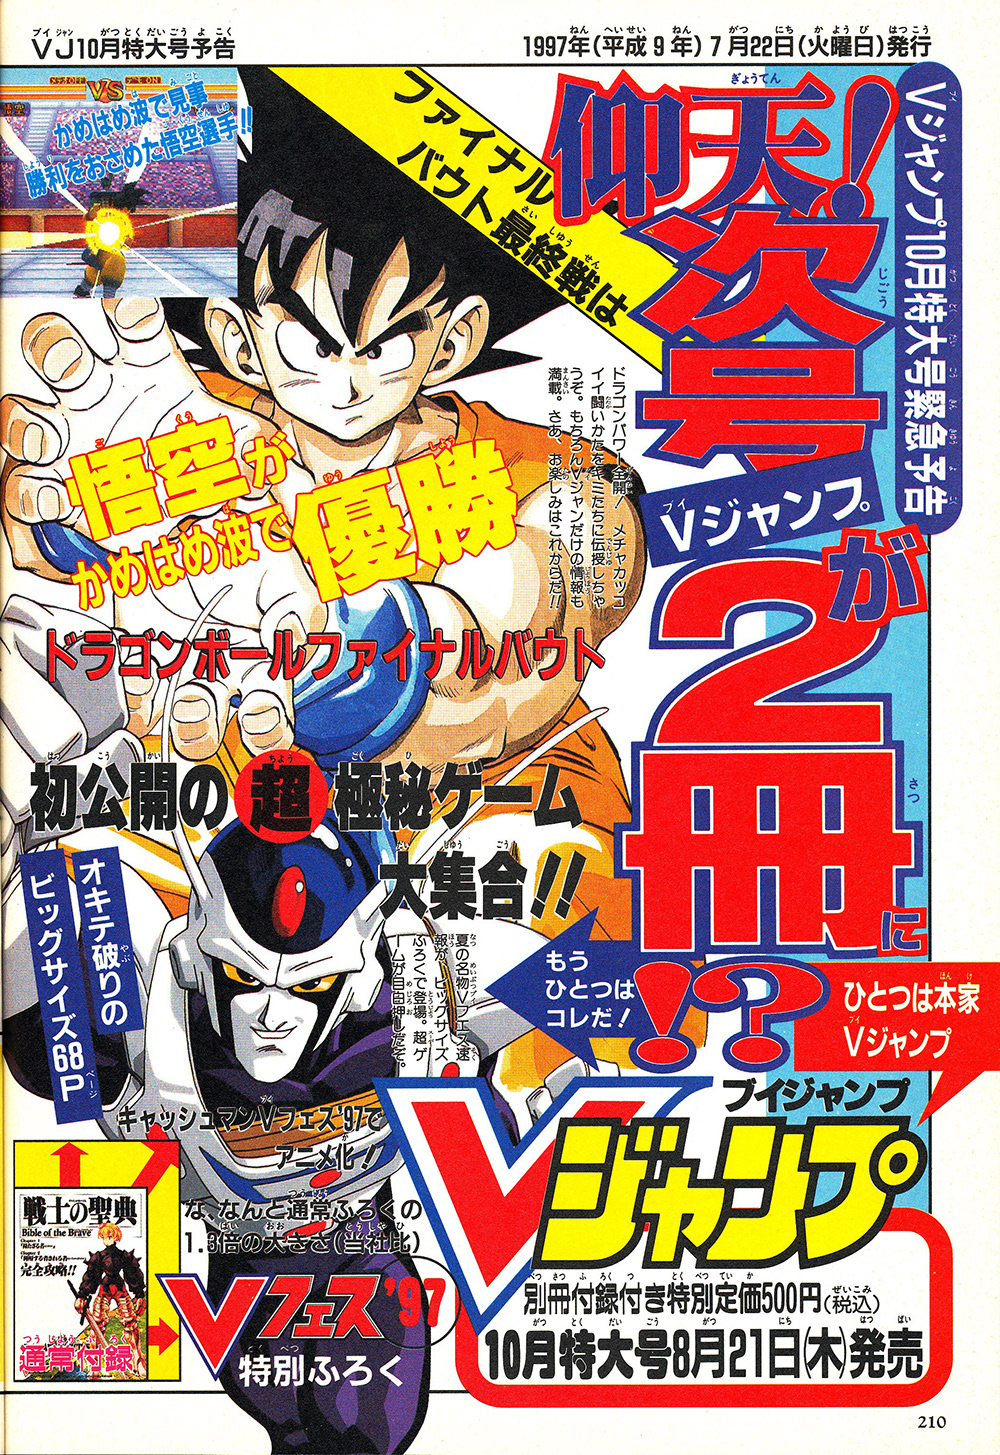 VJump Archives 199709